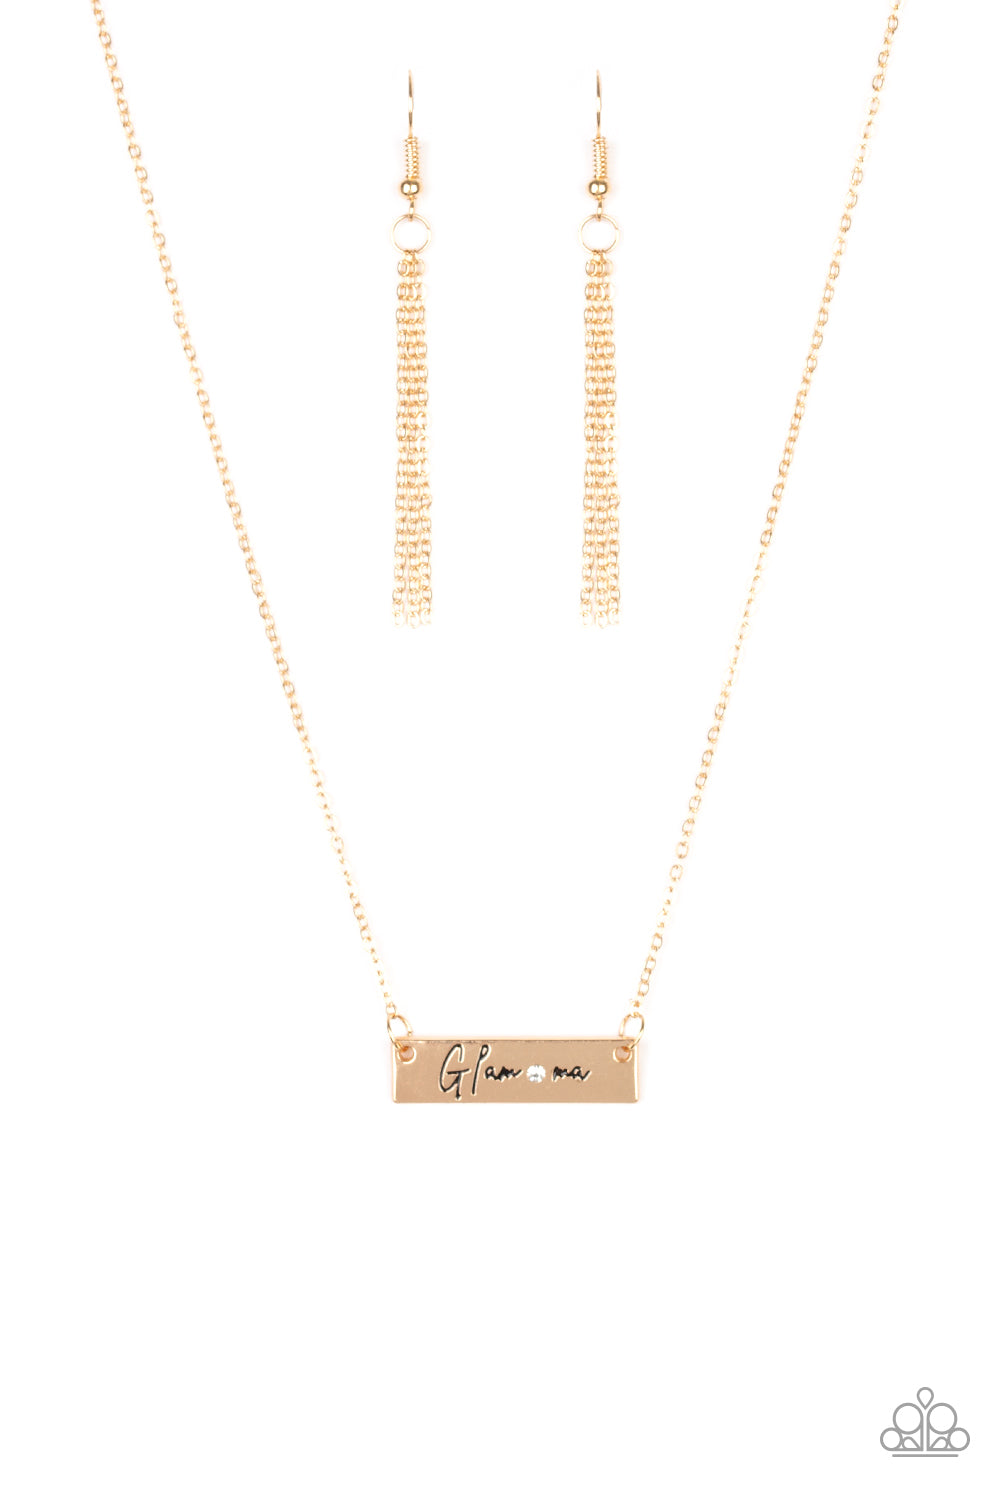 Paparazzi Necklaces - The Glam-ma - Gold